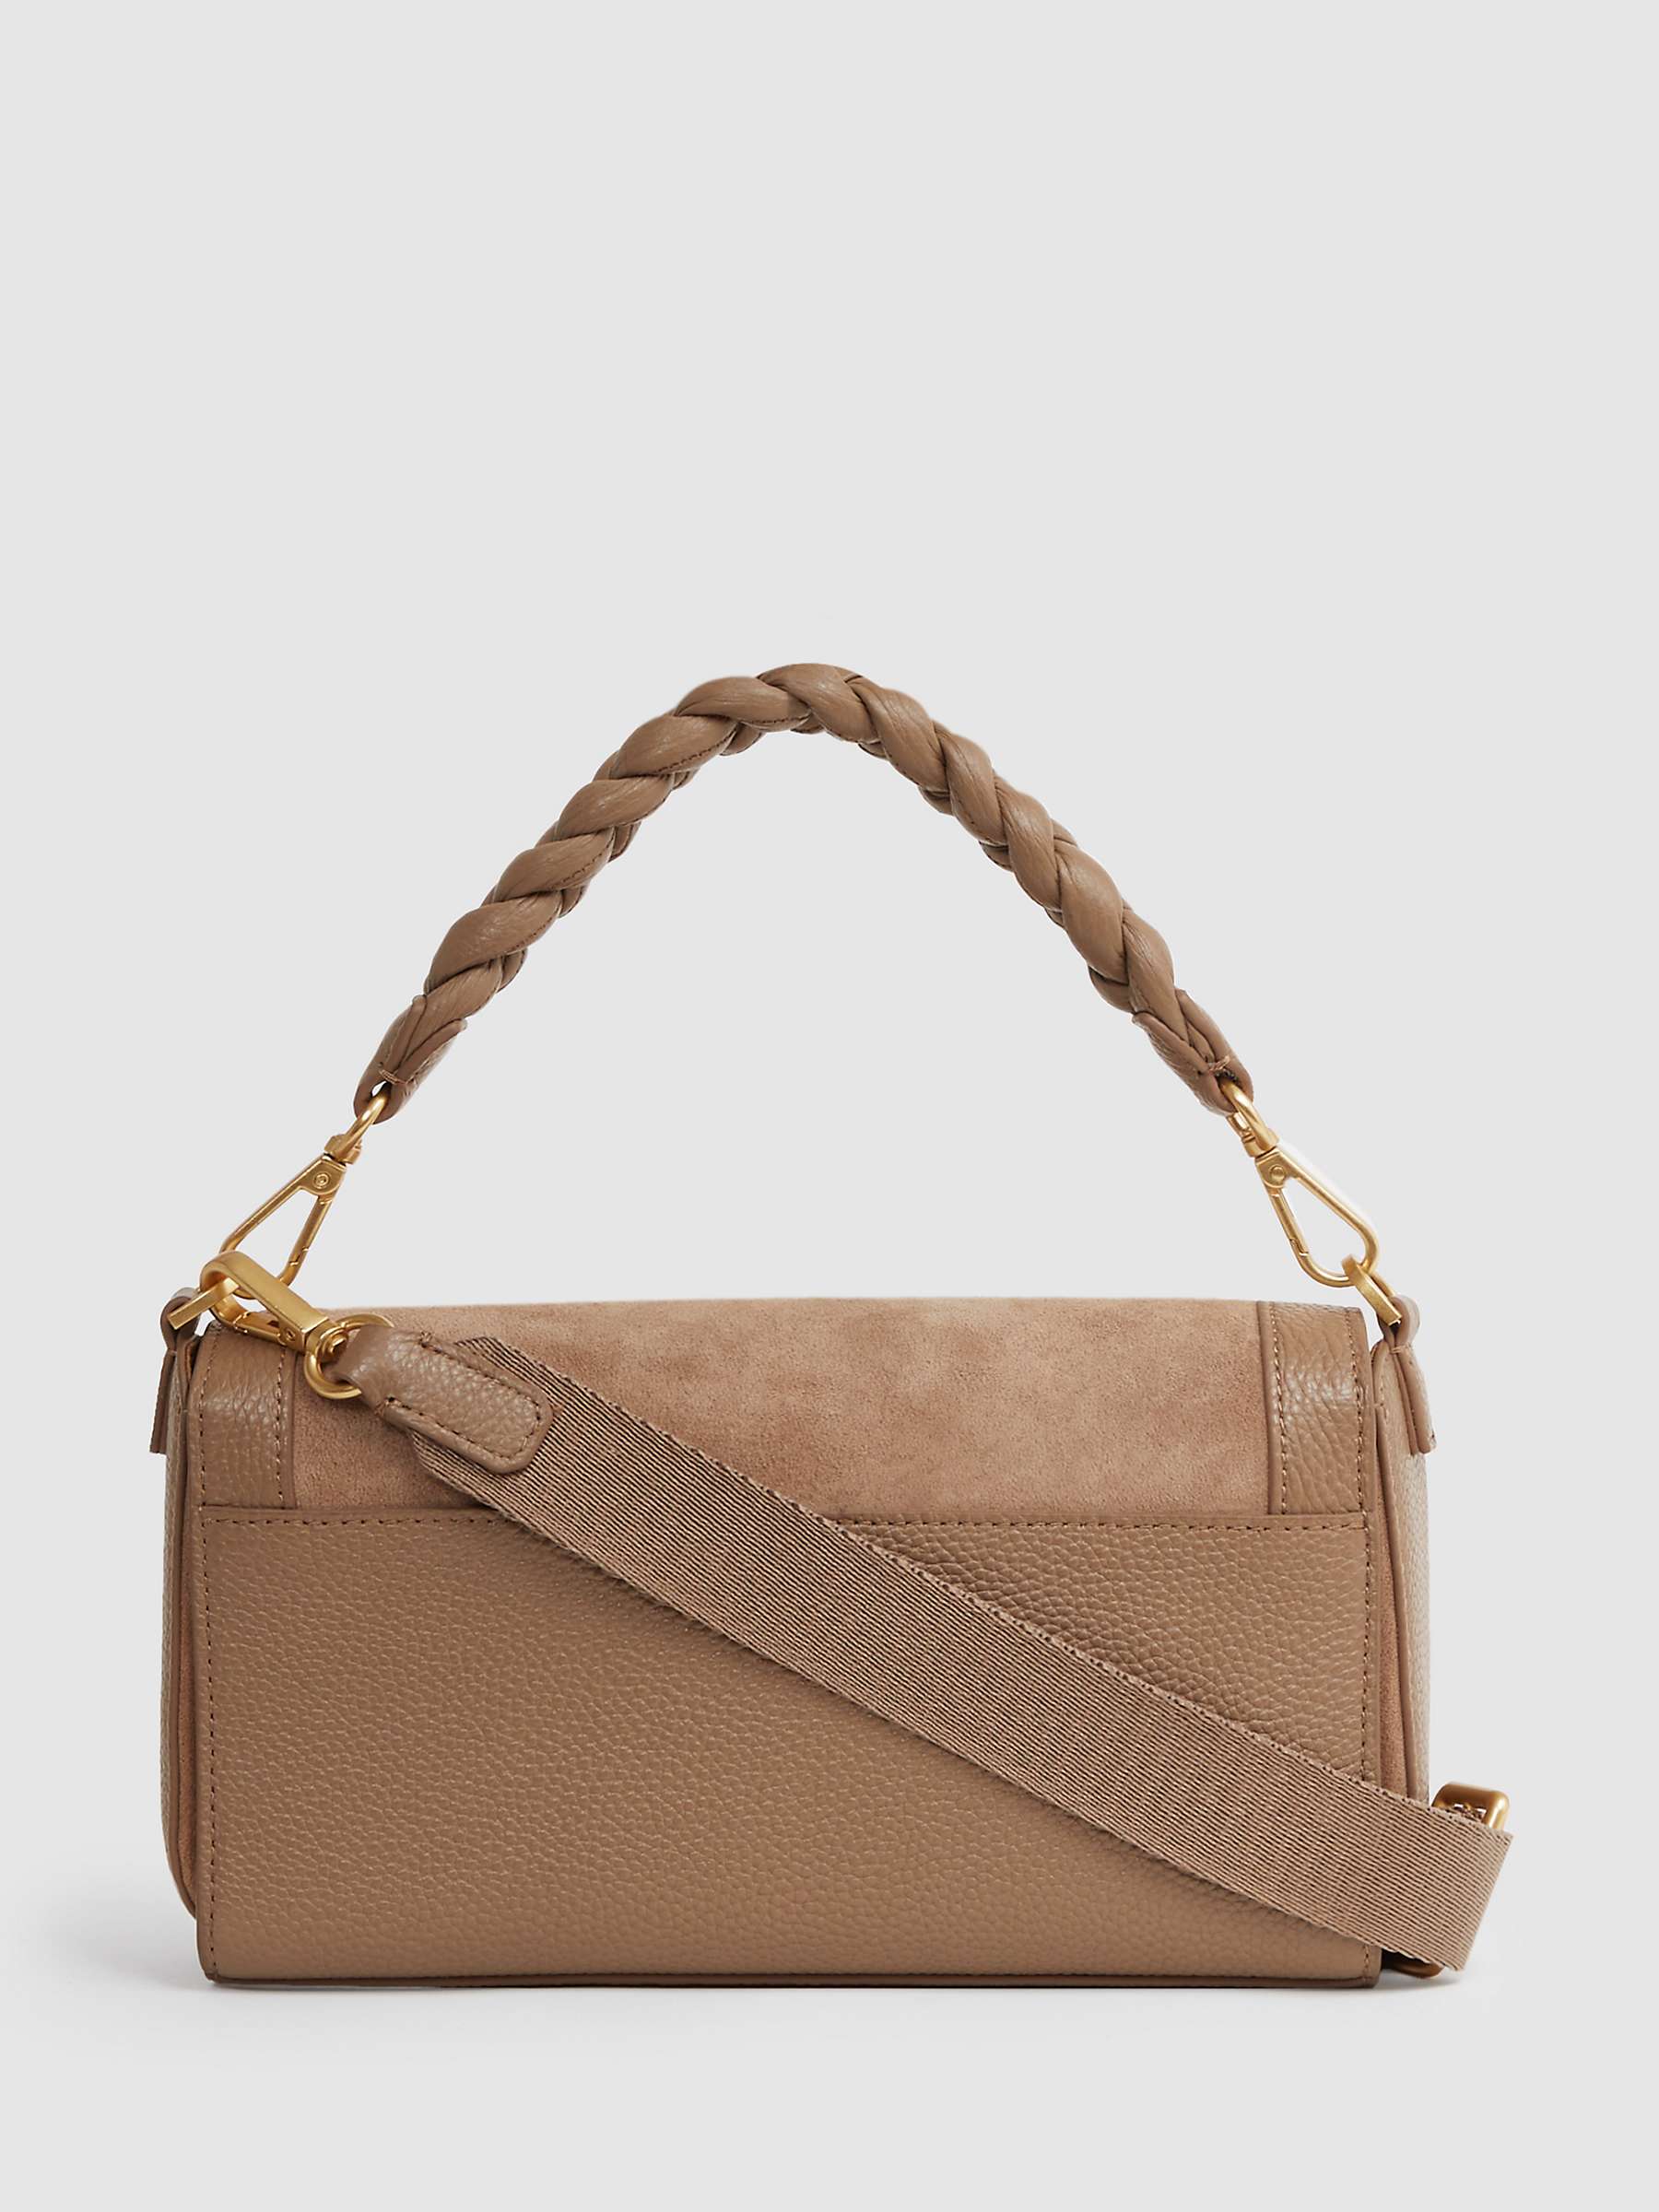 Reiss Ivy Leather/Suede Baguette Bag, Taupe at John Lewis & Partners